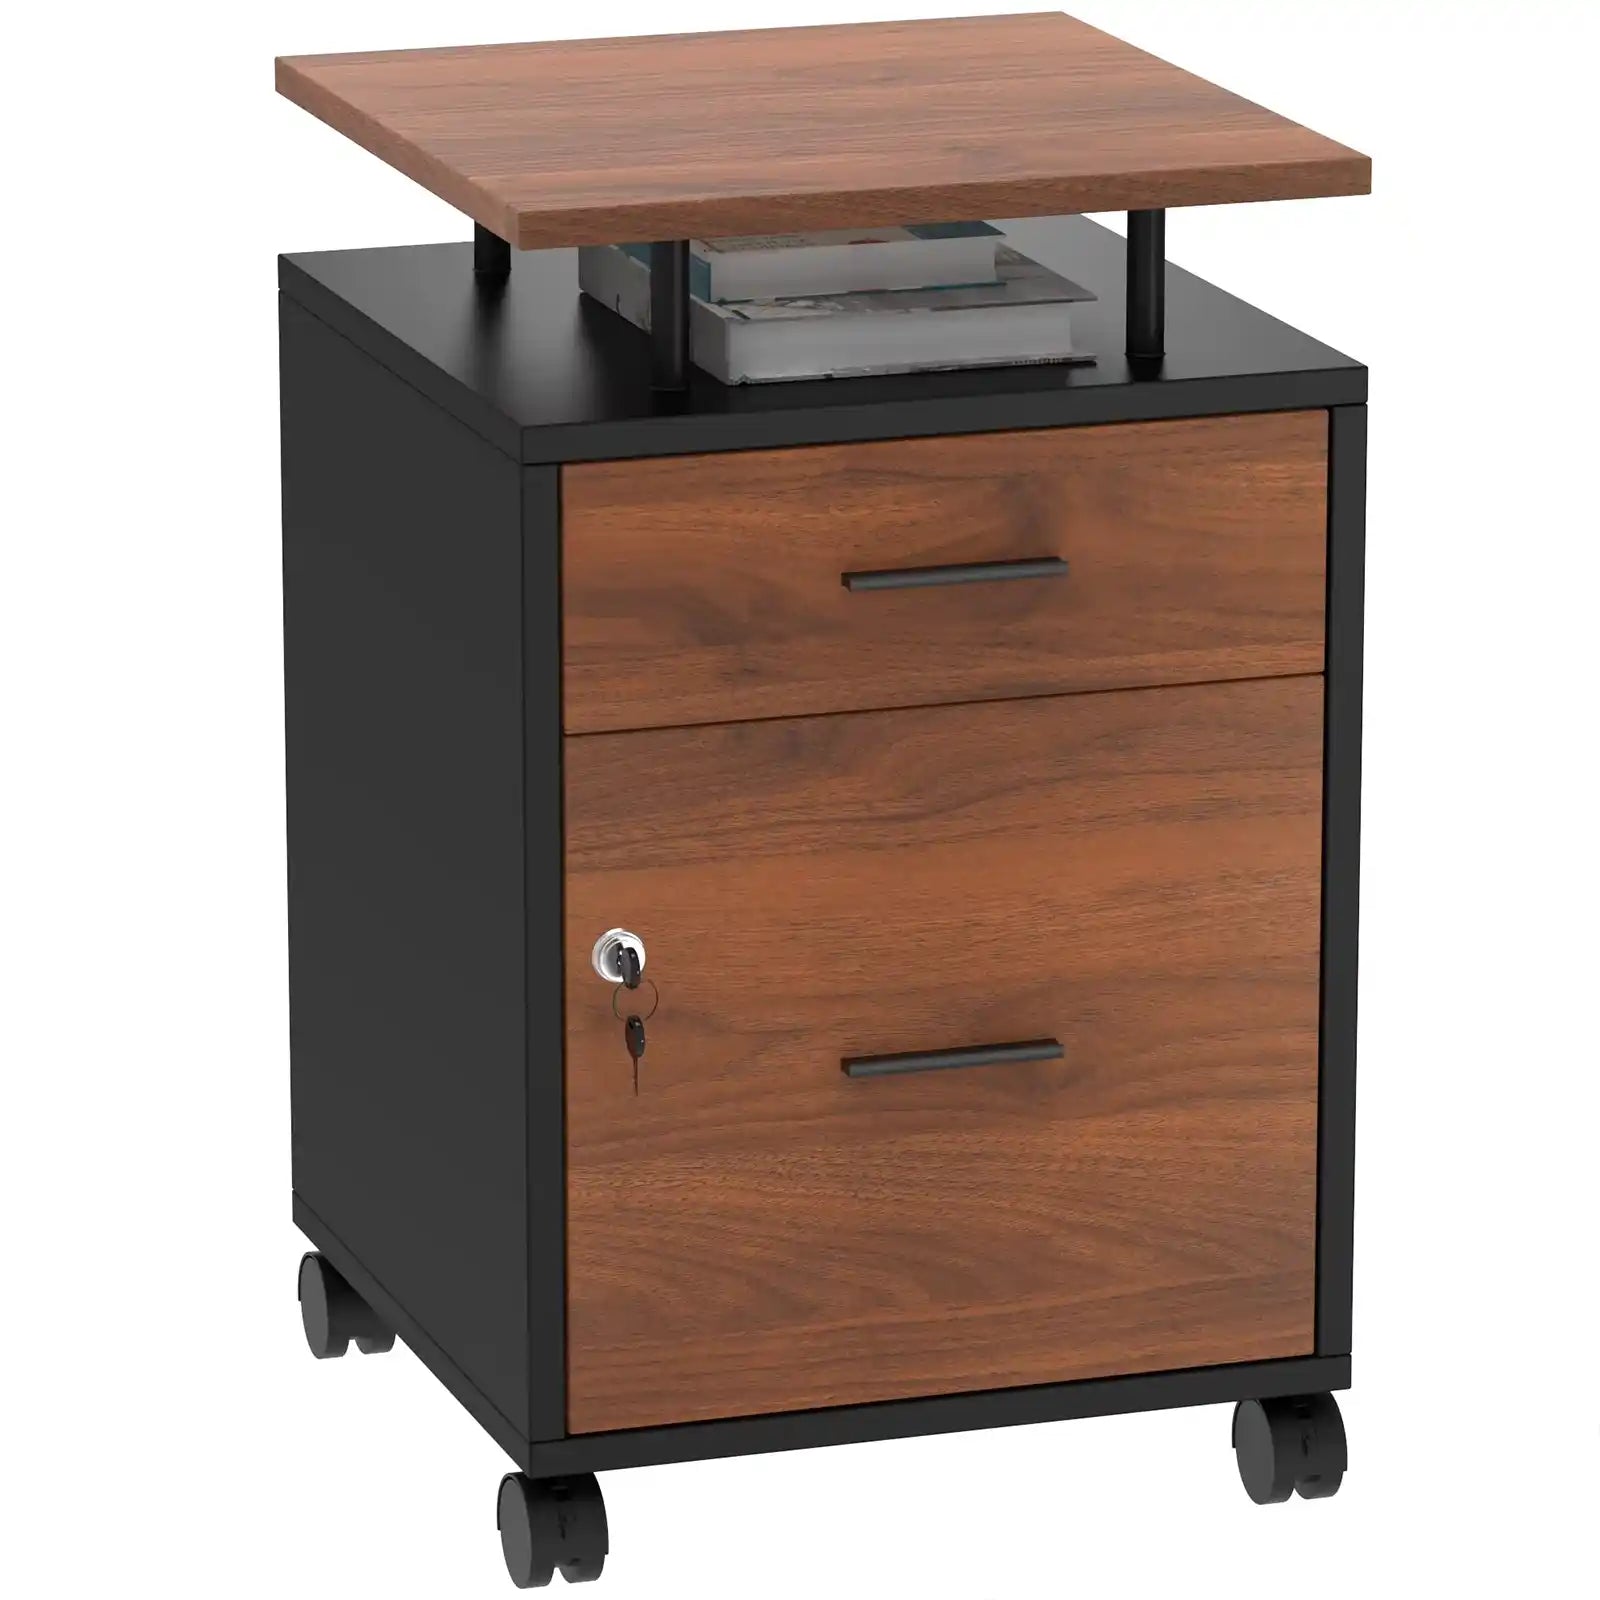 2-Tier File Cabinet with 1 Locked or 2 Locked